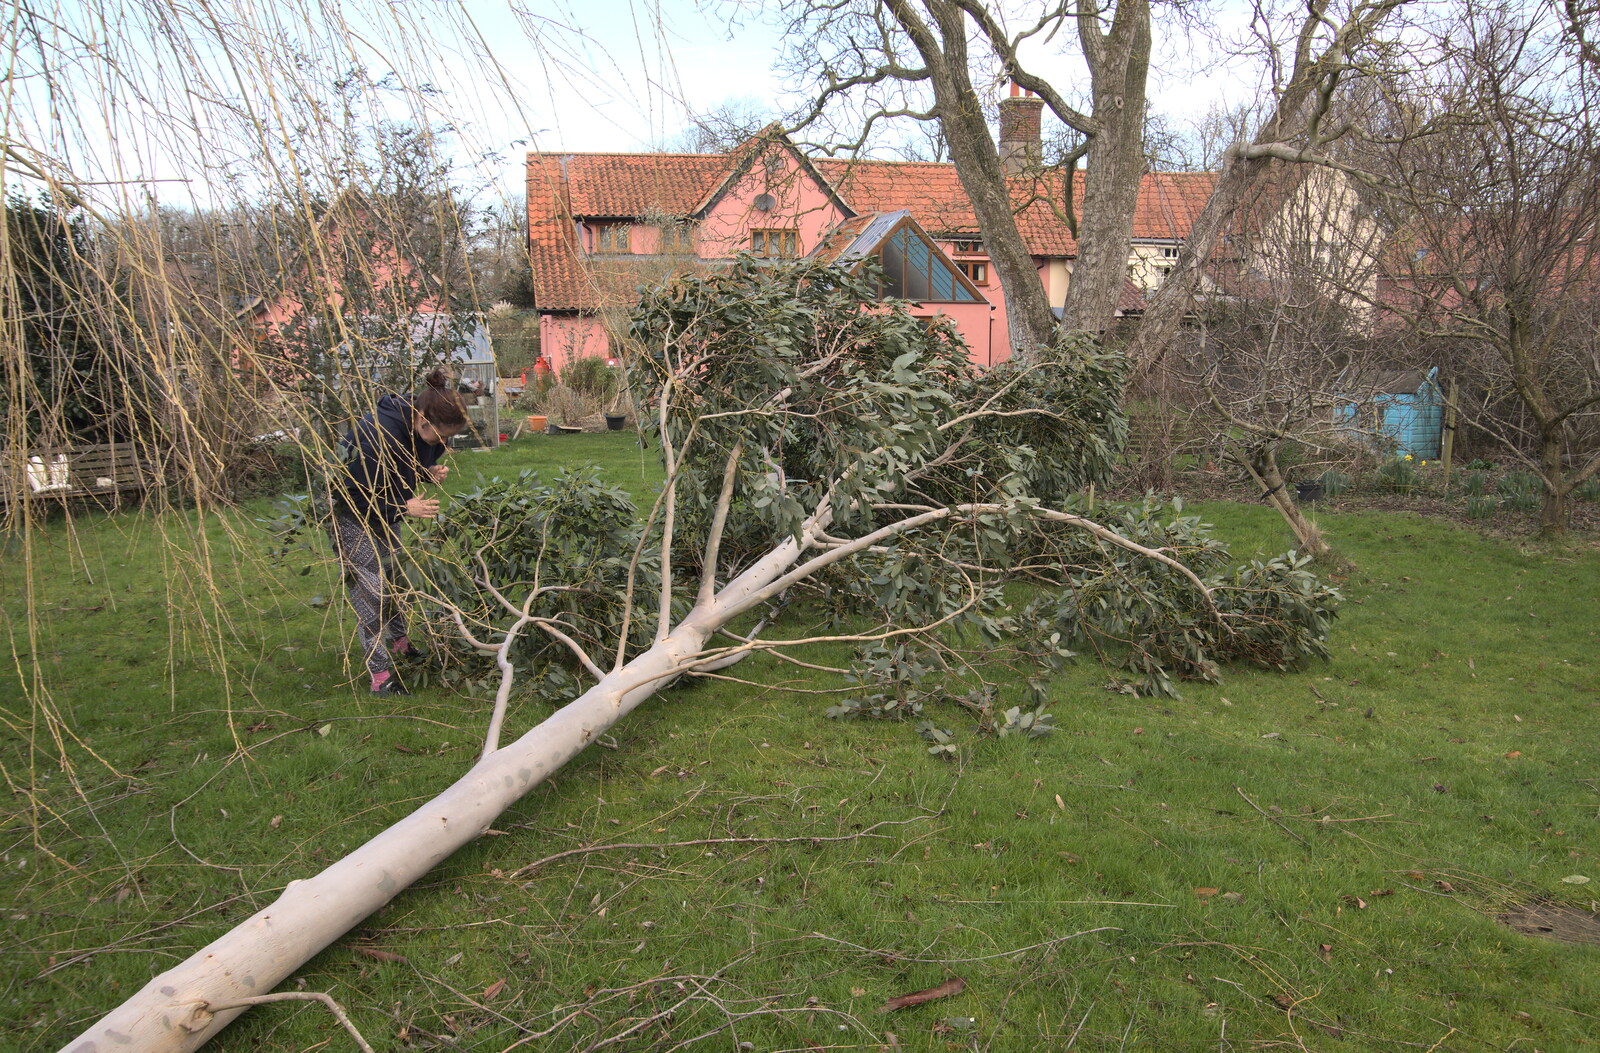 The eucalyptus tree on the lawn from The Swan Inn: An Epilogue, Brome, Suffolk - 17th February 2022